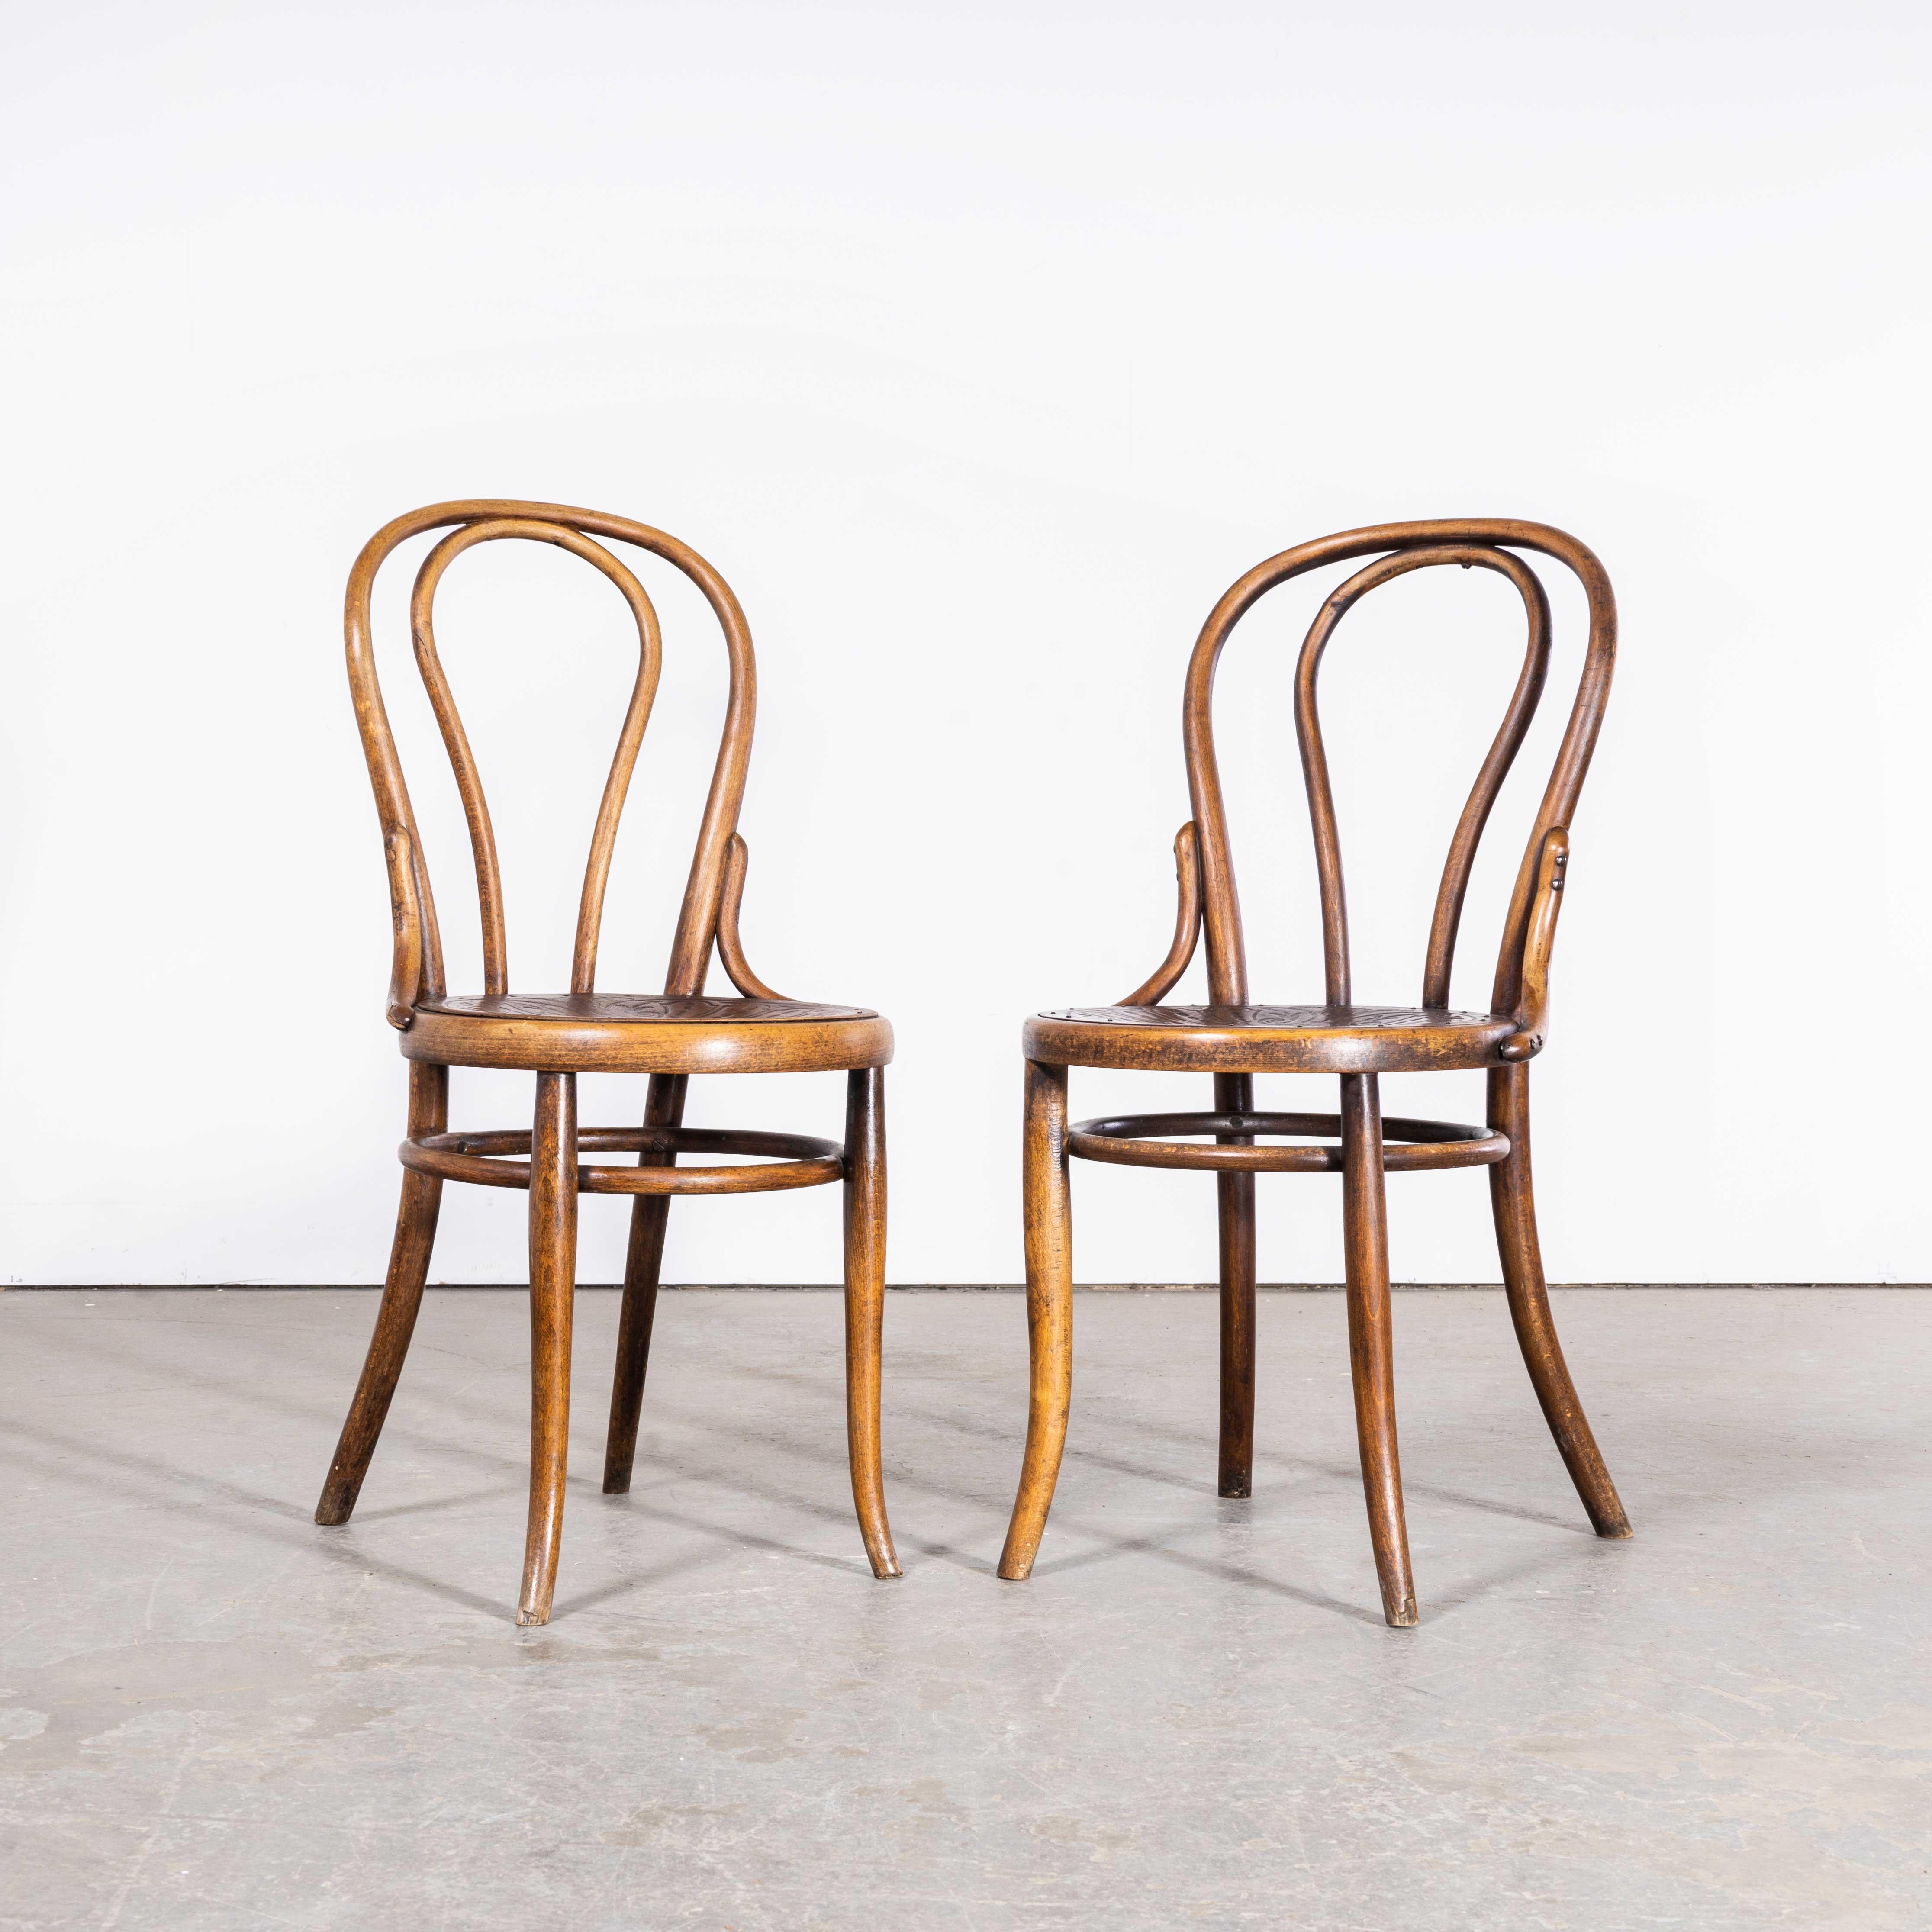 1920’s Bentwood Debrecen Hoop Back Dining Chairs – Pair
1920’s Bentwood Debrecen Hoop Back Dining Chairs – Pair. It is hard to be precise about the origin of these chairs as little history is known, but what we do know is at the beginning of the